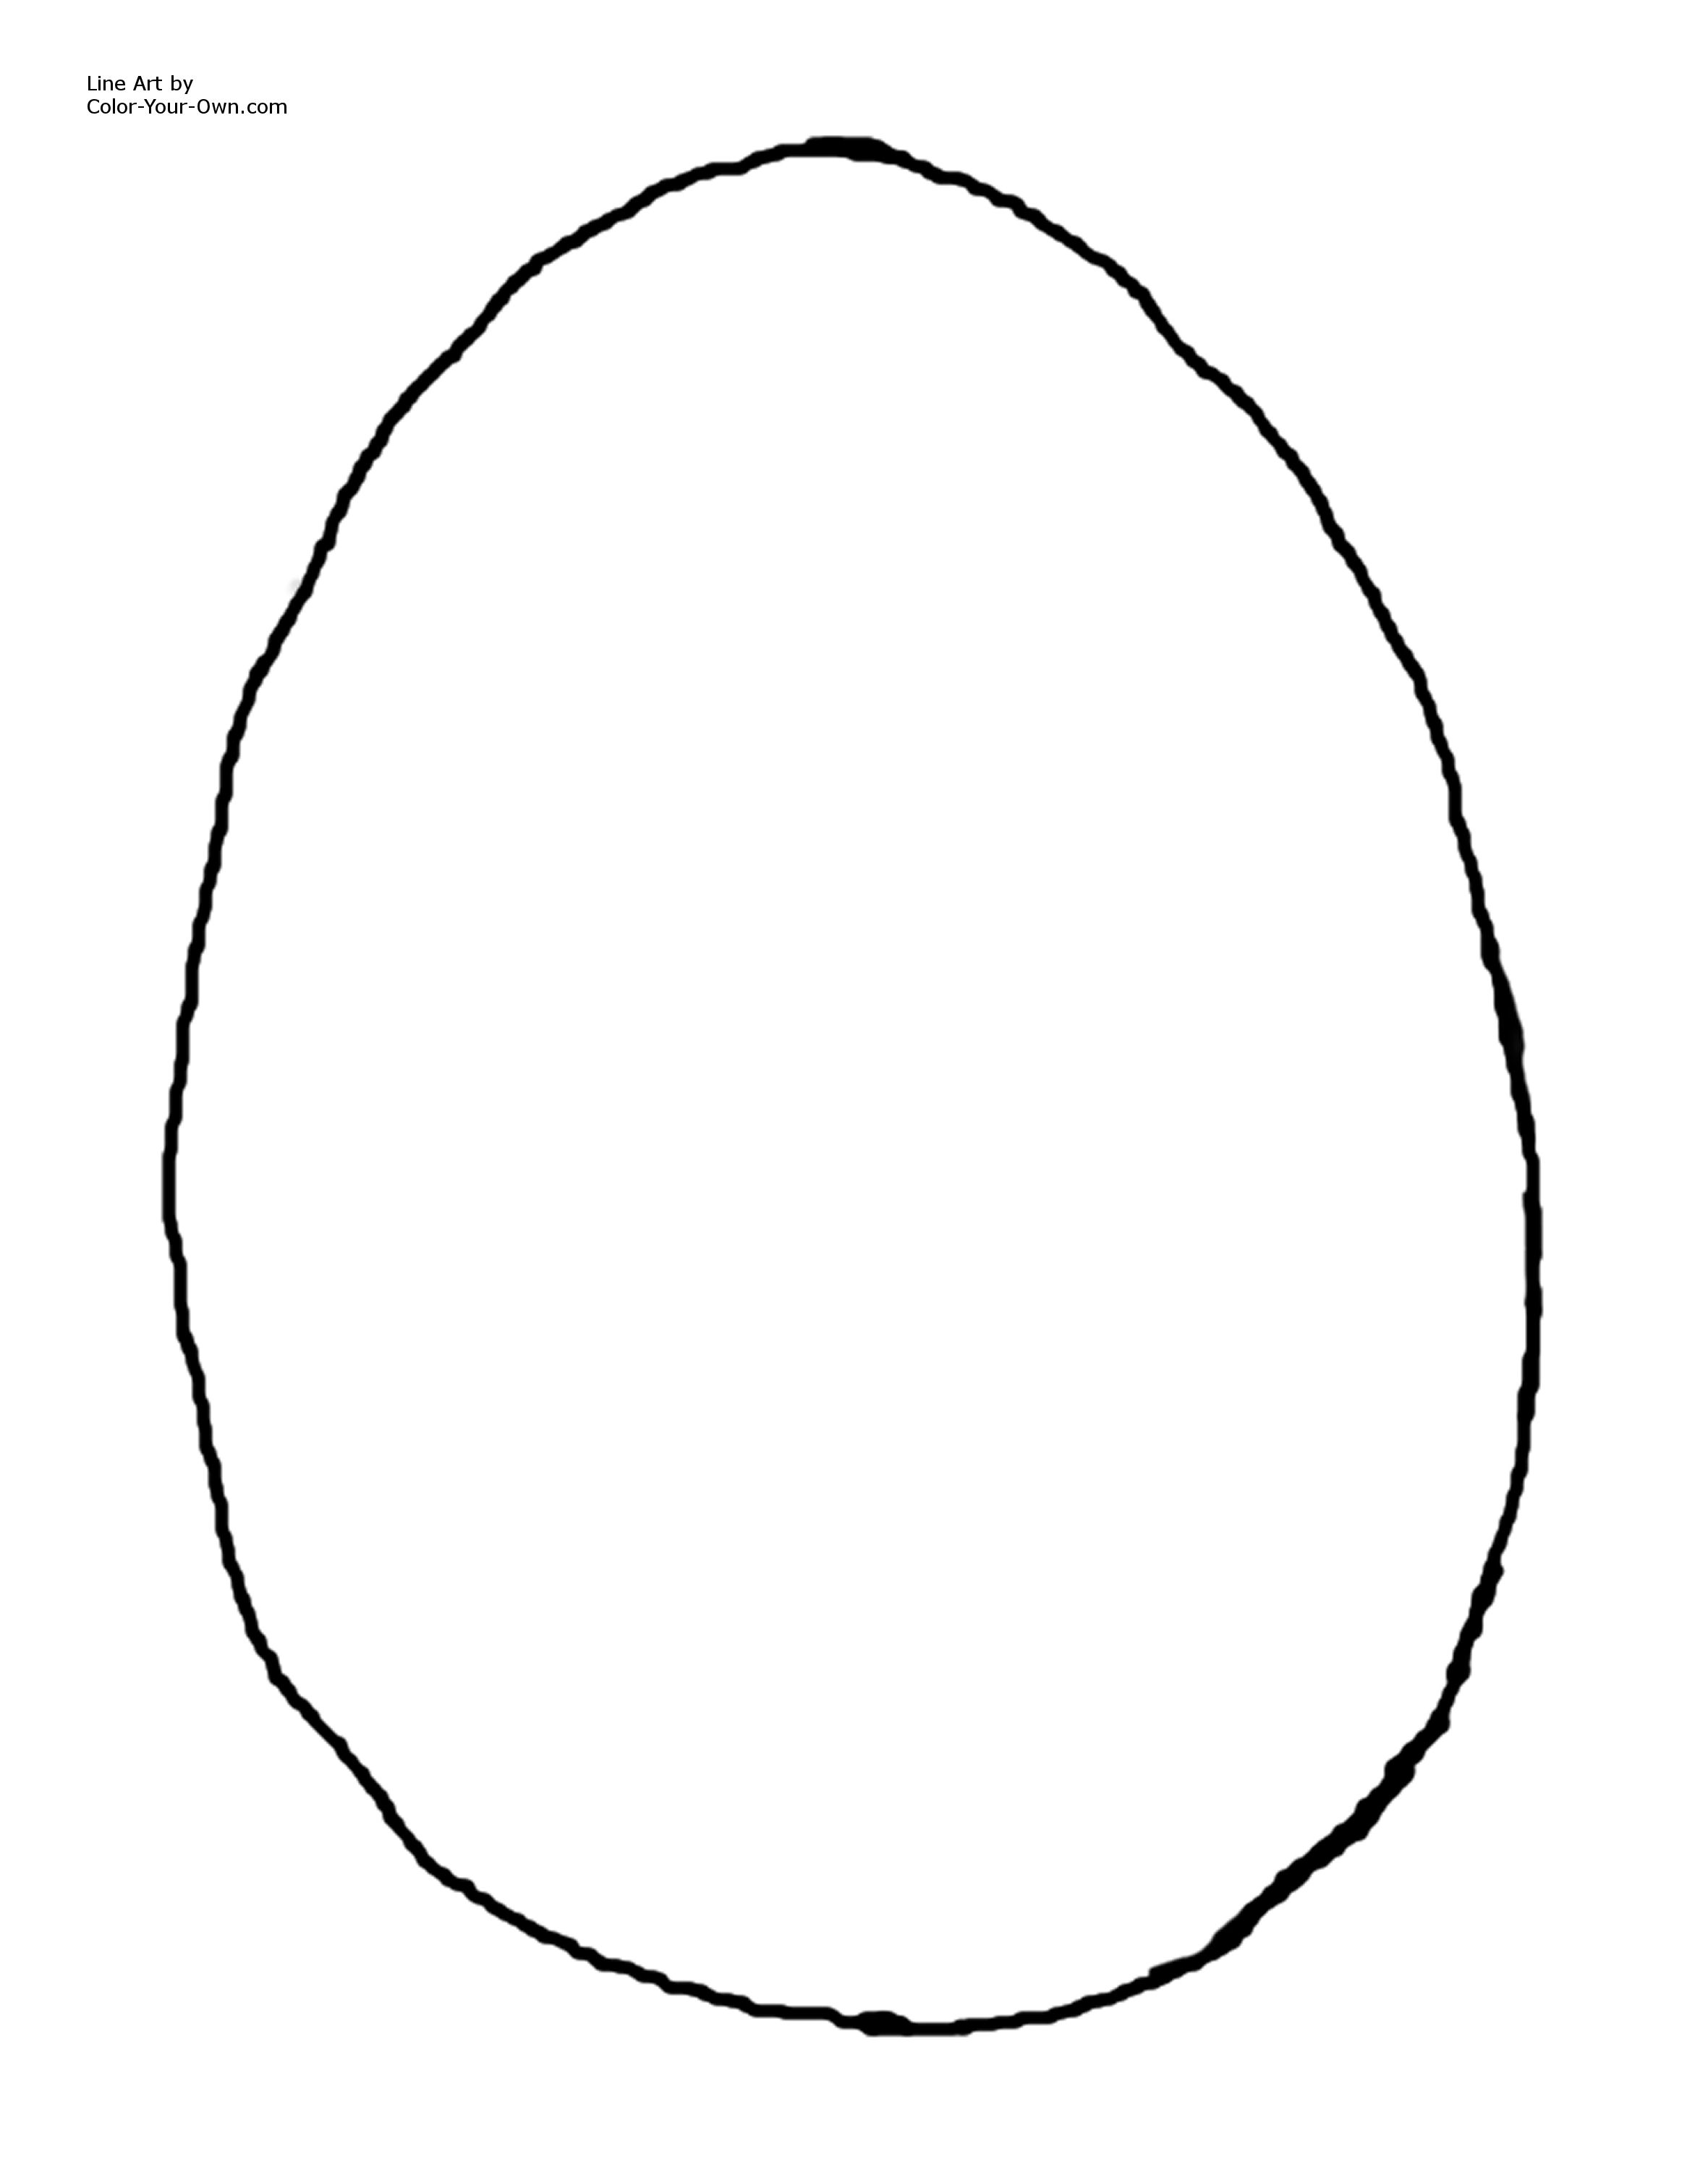 Free Plain Easter Egg Coloring Pages Coloring Wallpapers Download Free Images Wallpaper [coloring654.blogspot.com]